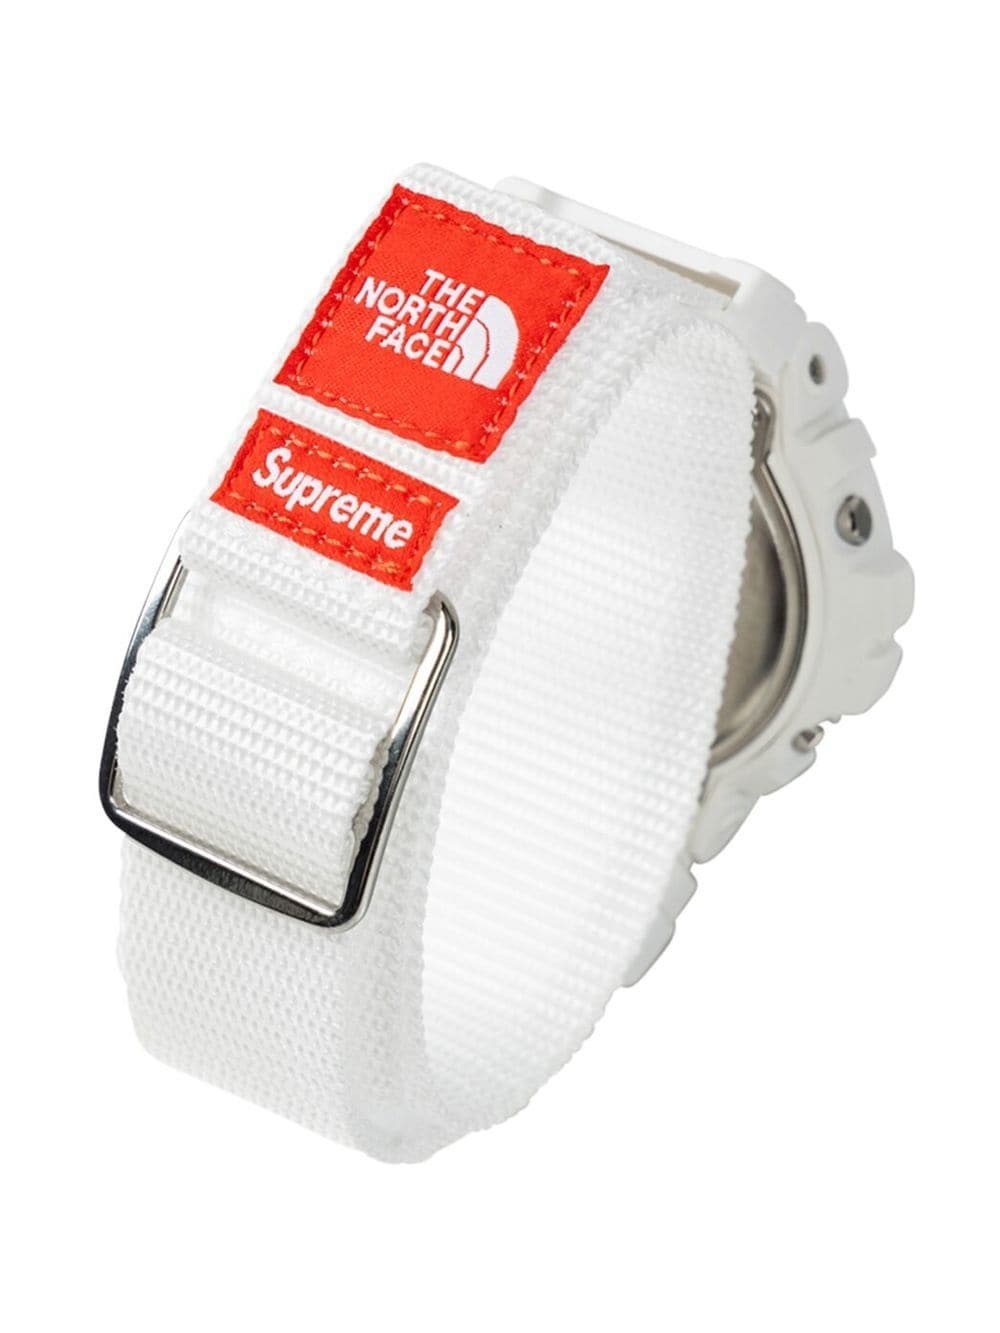 x The North Face x G-Shock DW-6900 - 3